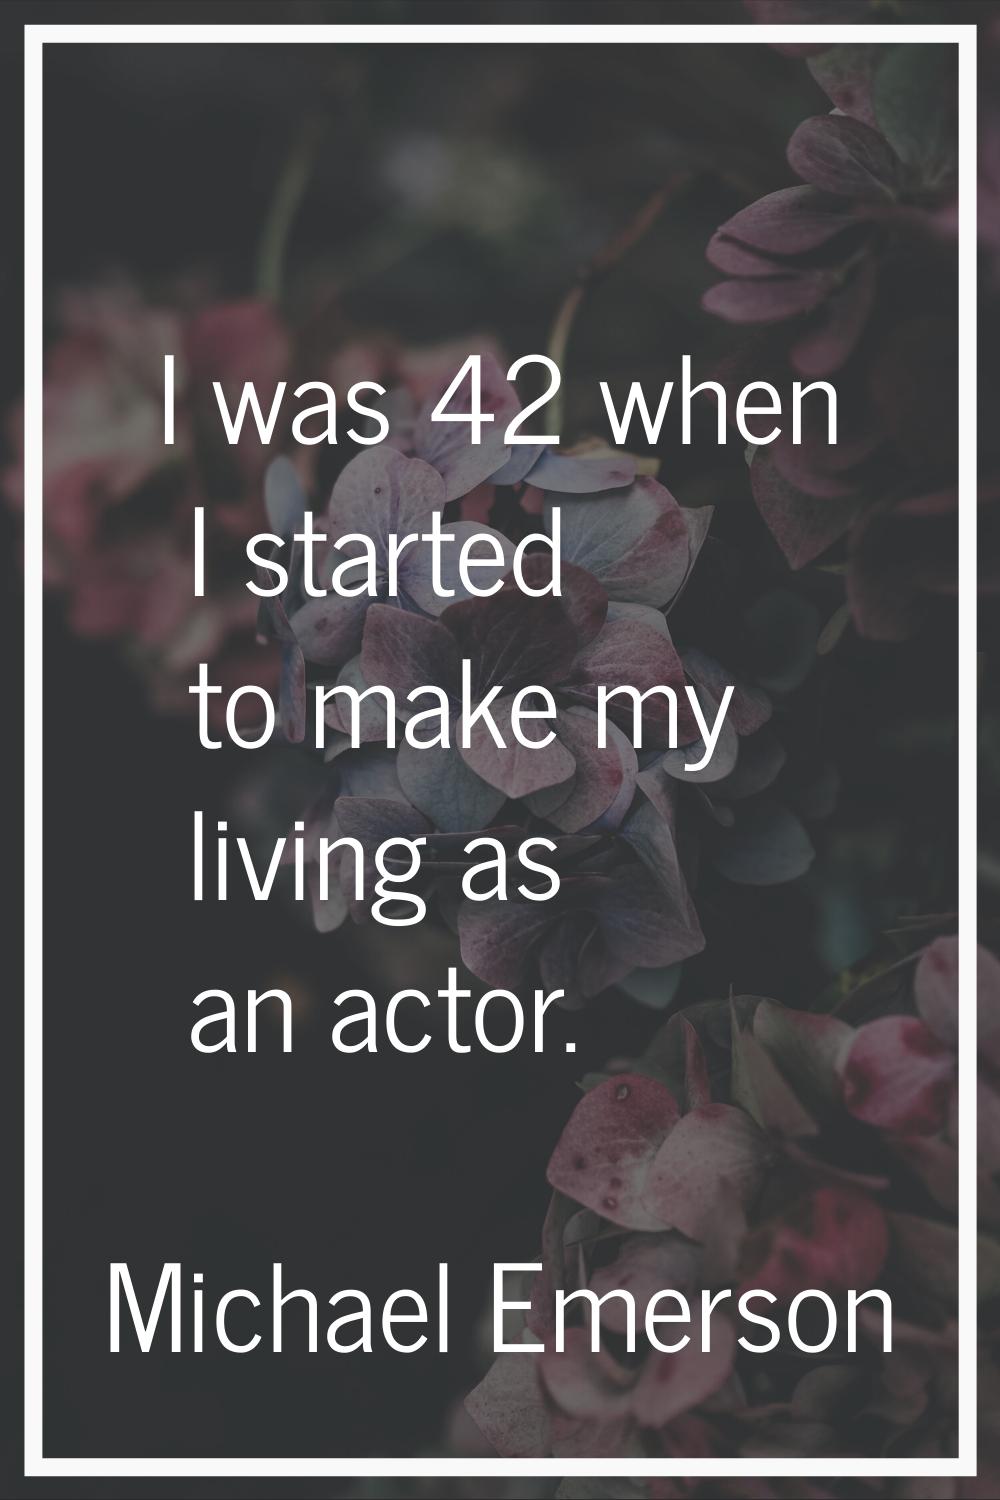 I was 42 when I started to make my living as an actor.